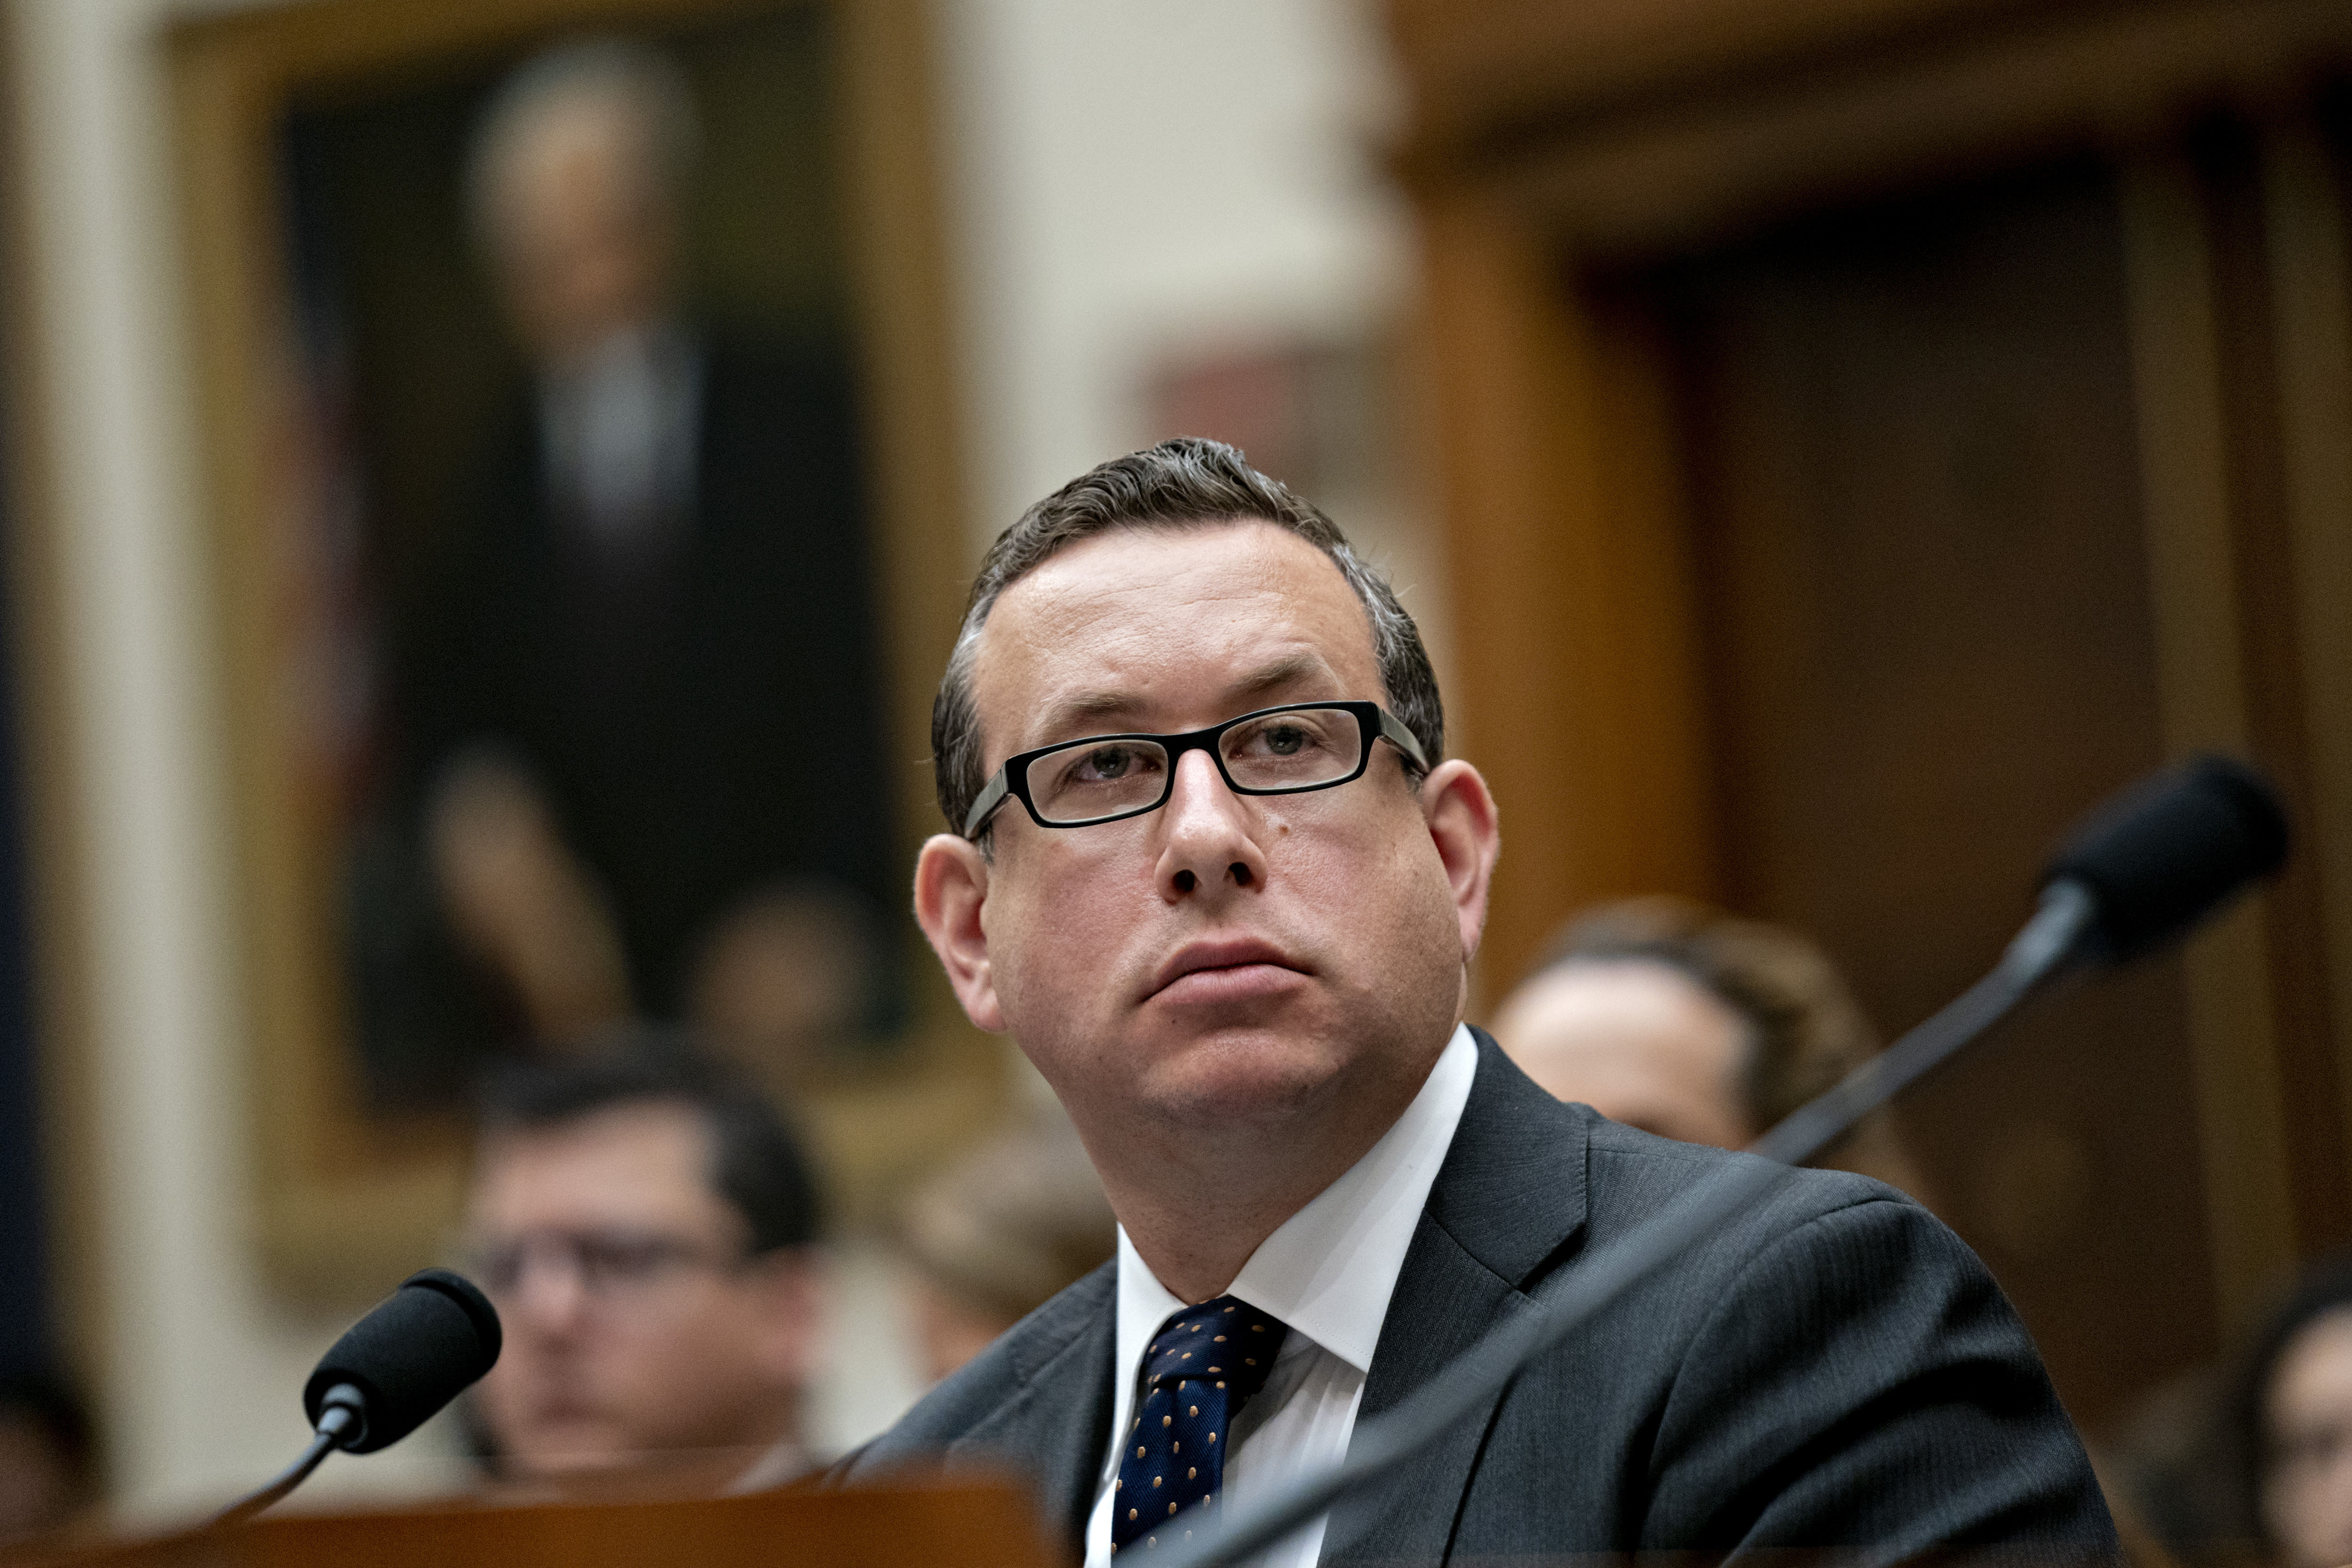 Joseph Edlow — then a deputy assistant attorney general with the Office of Legal Policy at the Department of Justice — listens during a hearing in Washington, DC, on July 25, 2019.